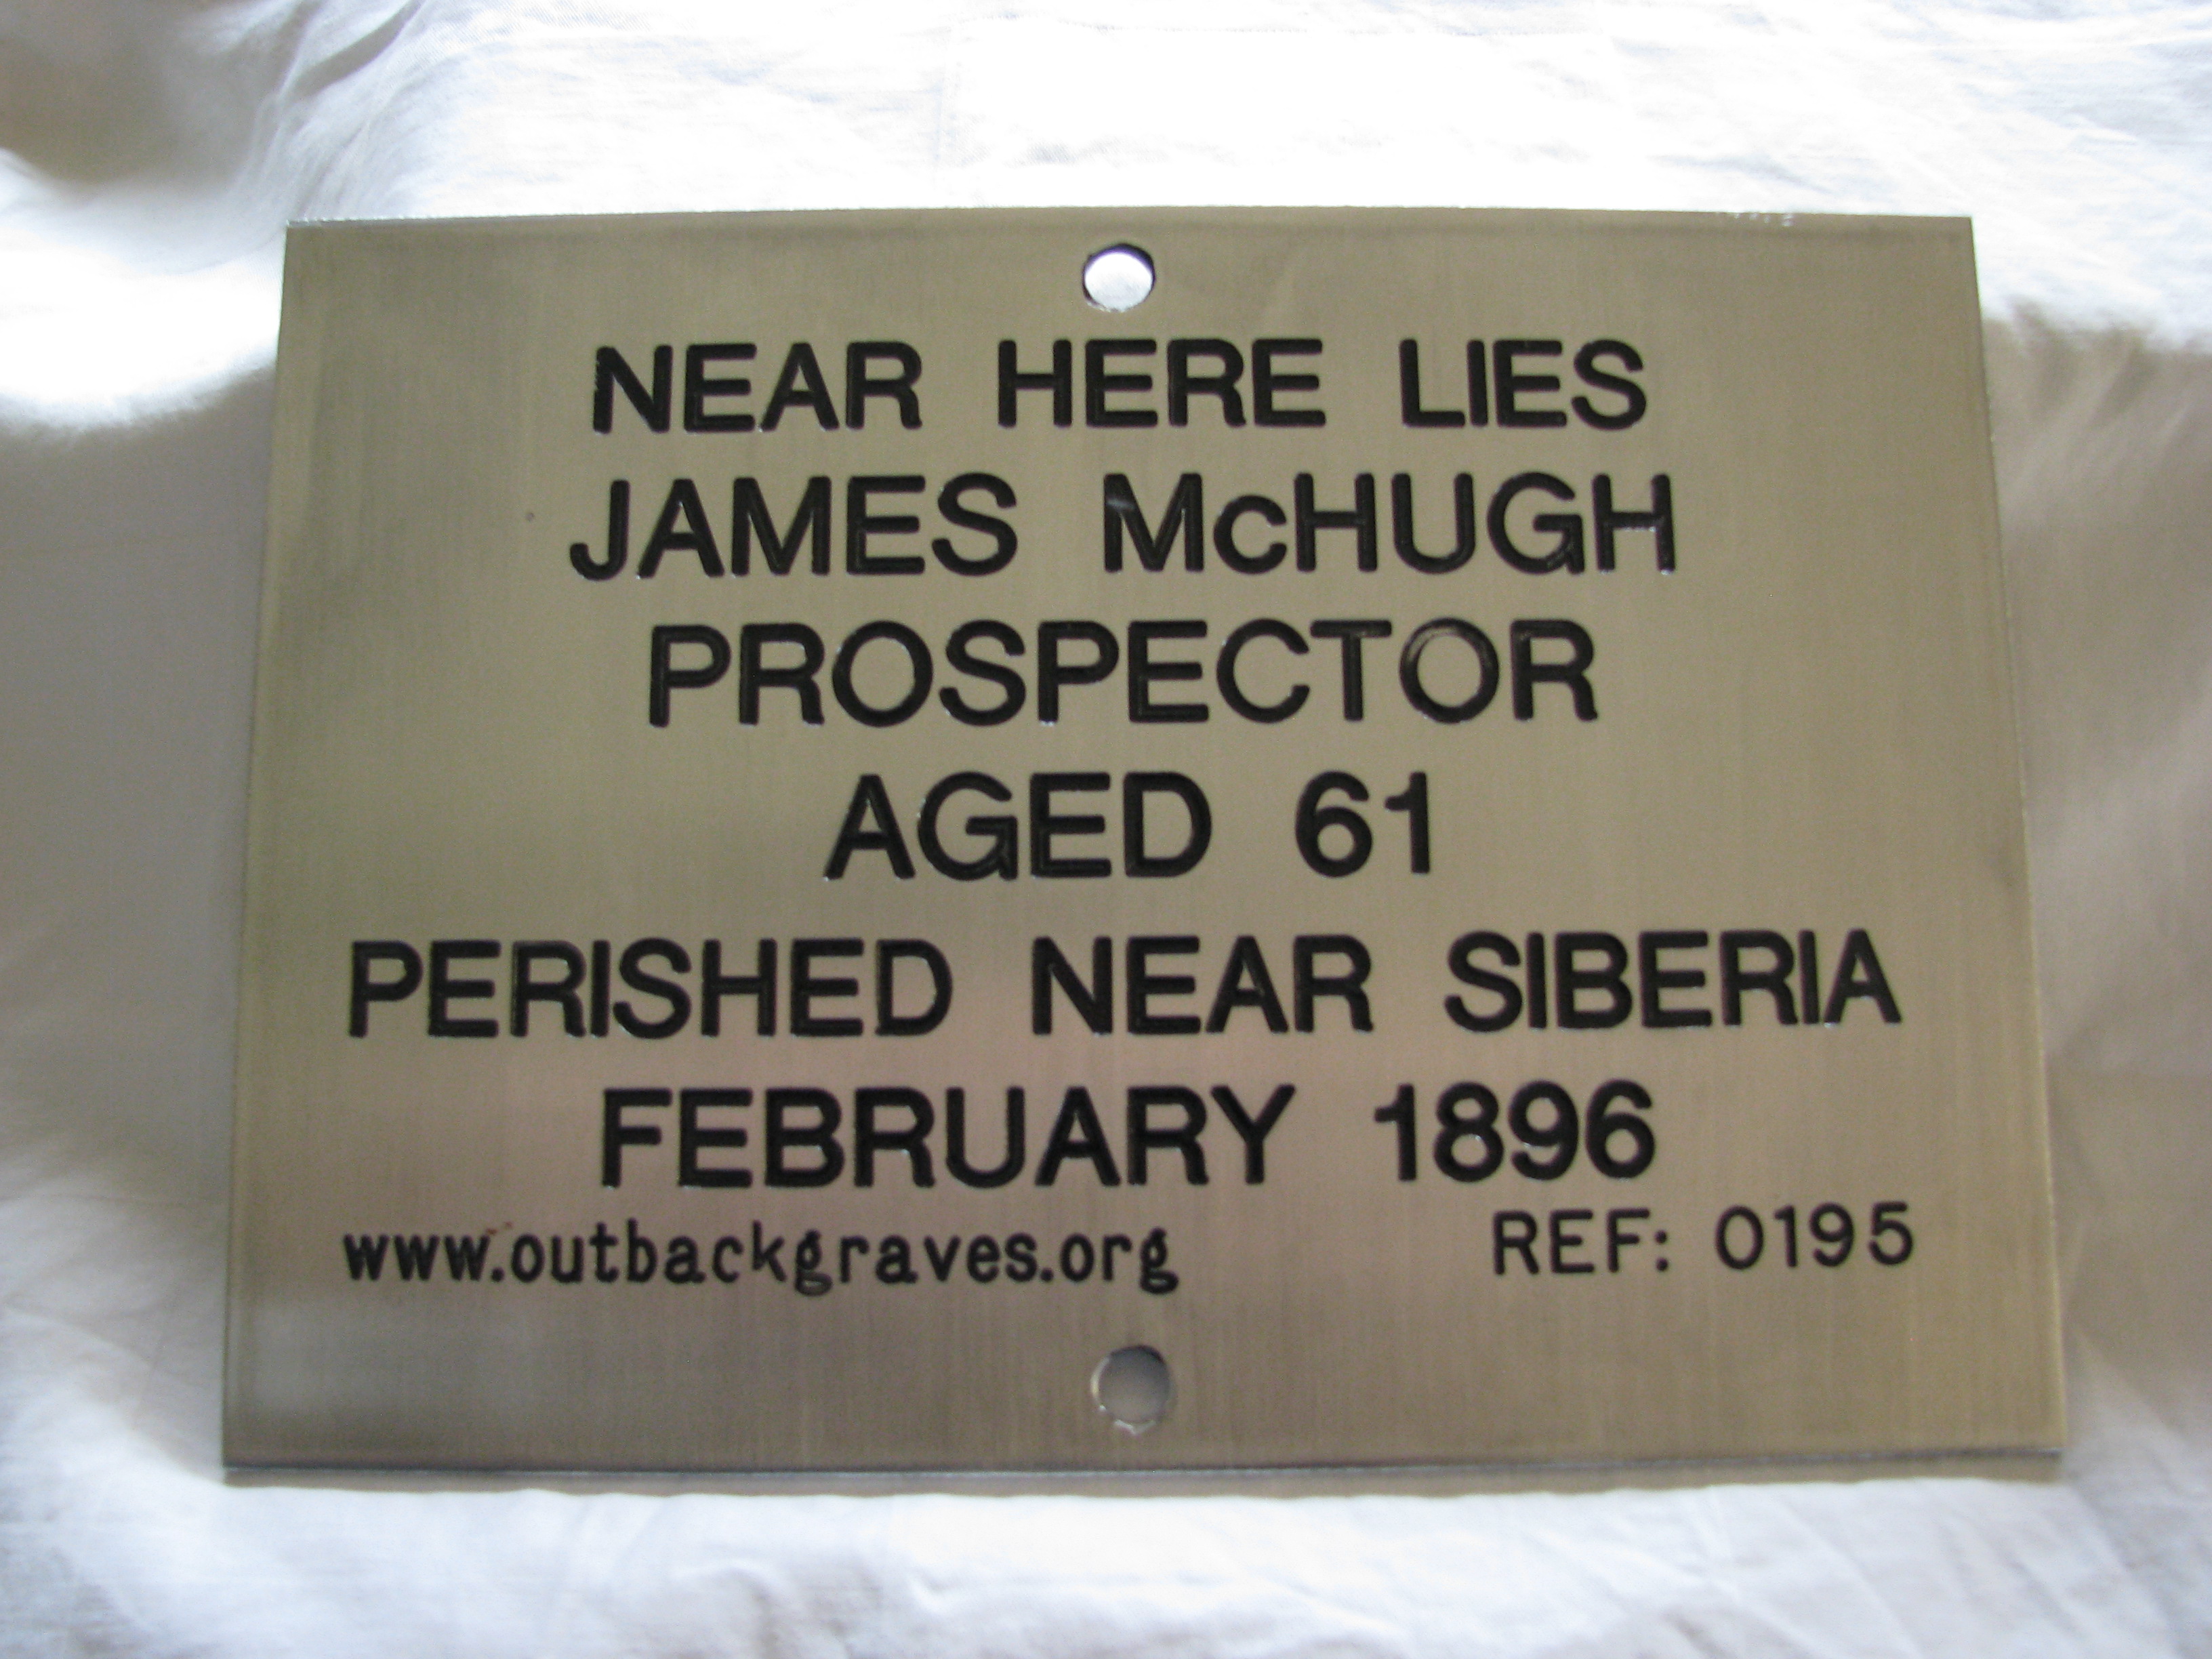 This is a photograph of plaque number 195 for JAMES McHUGH at SIBERIA